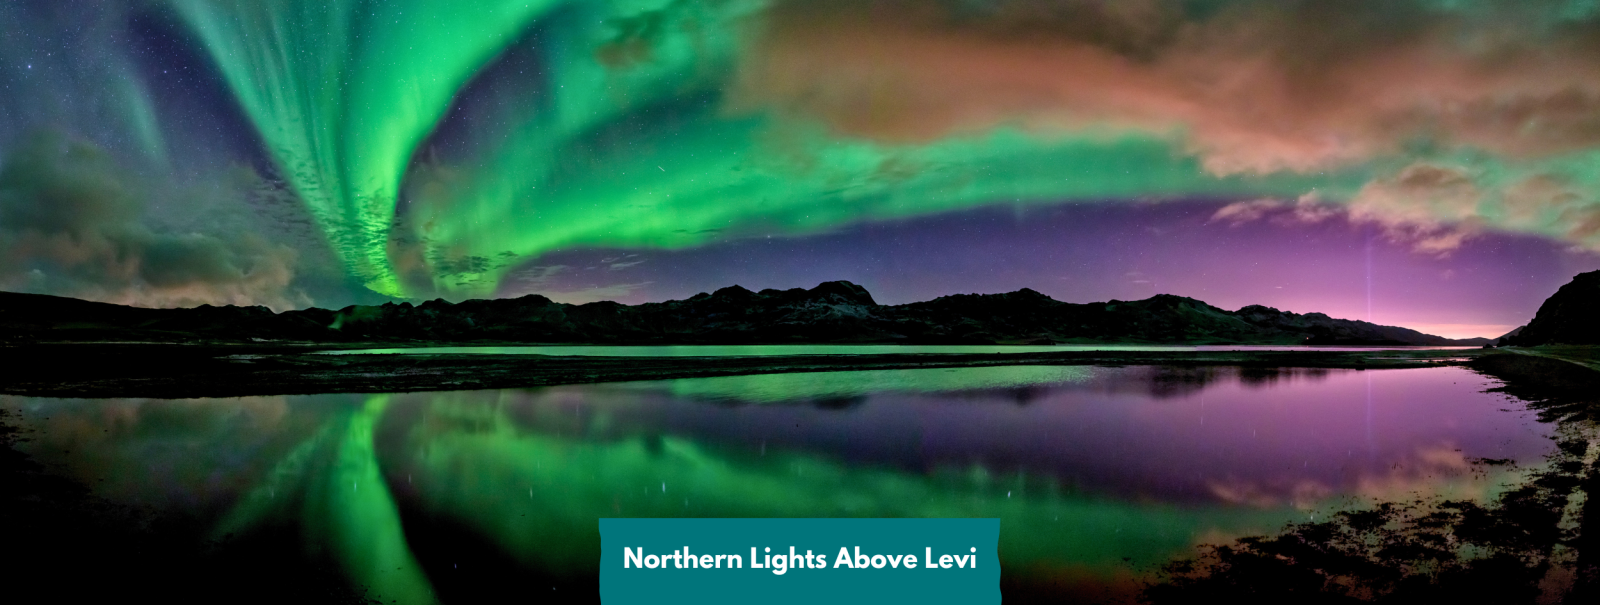 The Northern Lights Above Levi